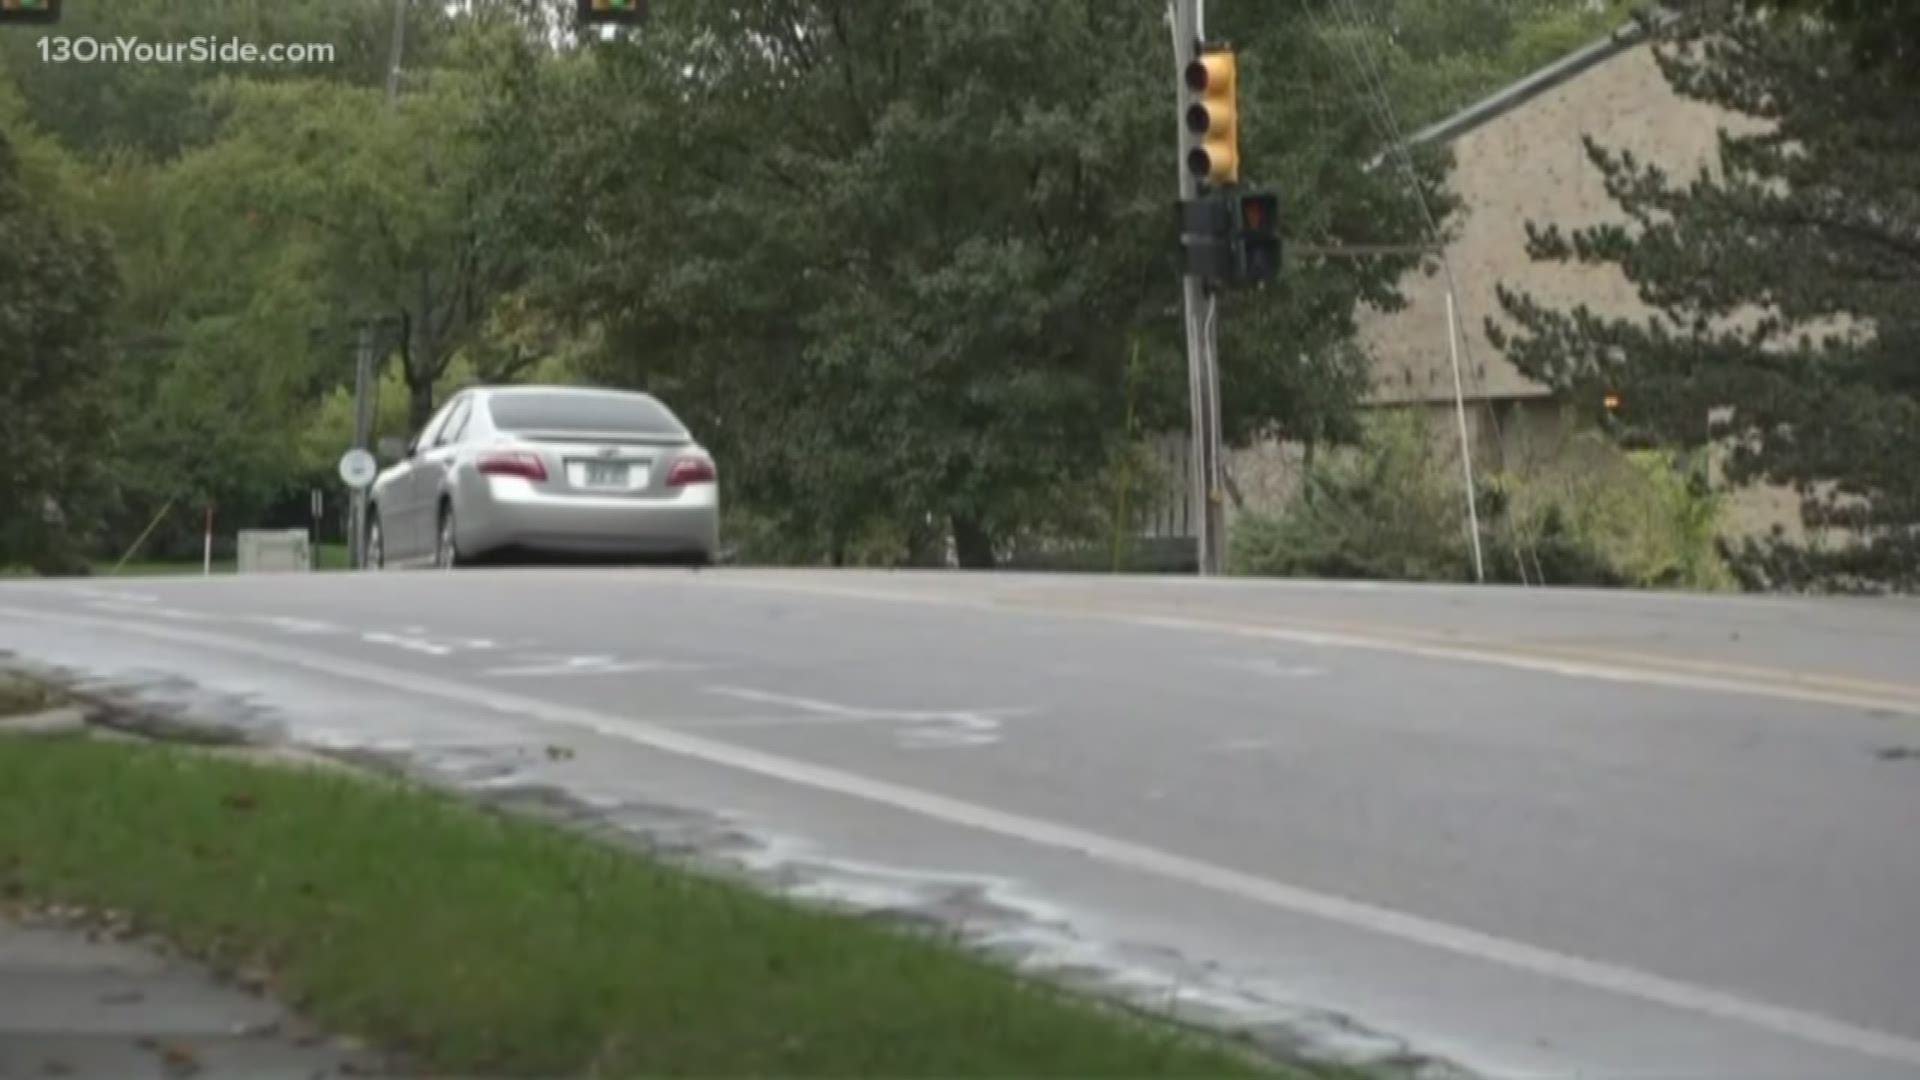 An Ottawa Hills High School student was hit by a car while crossing the street.